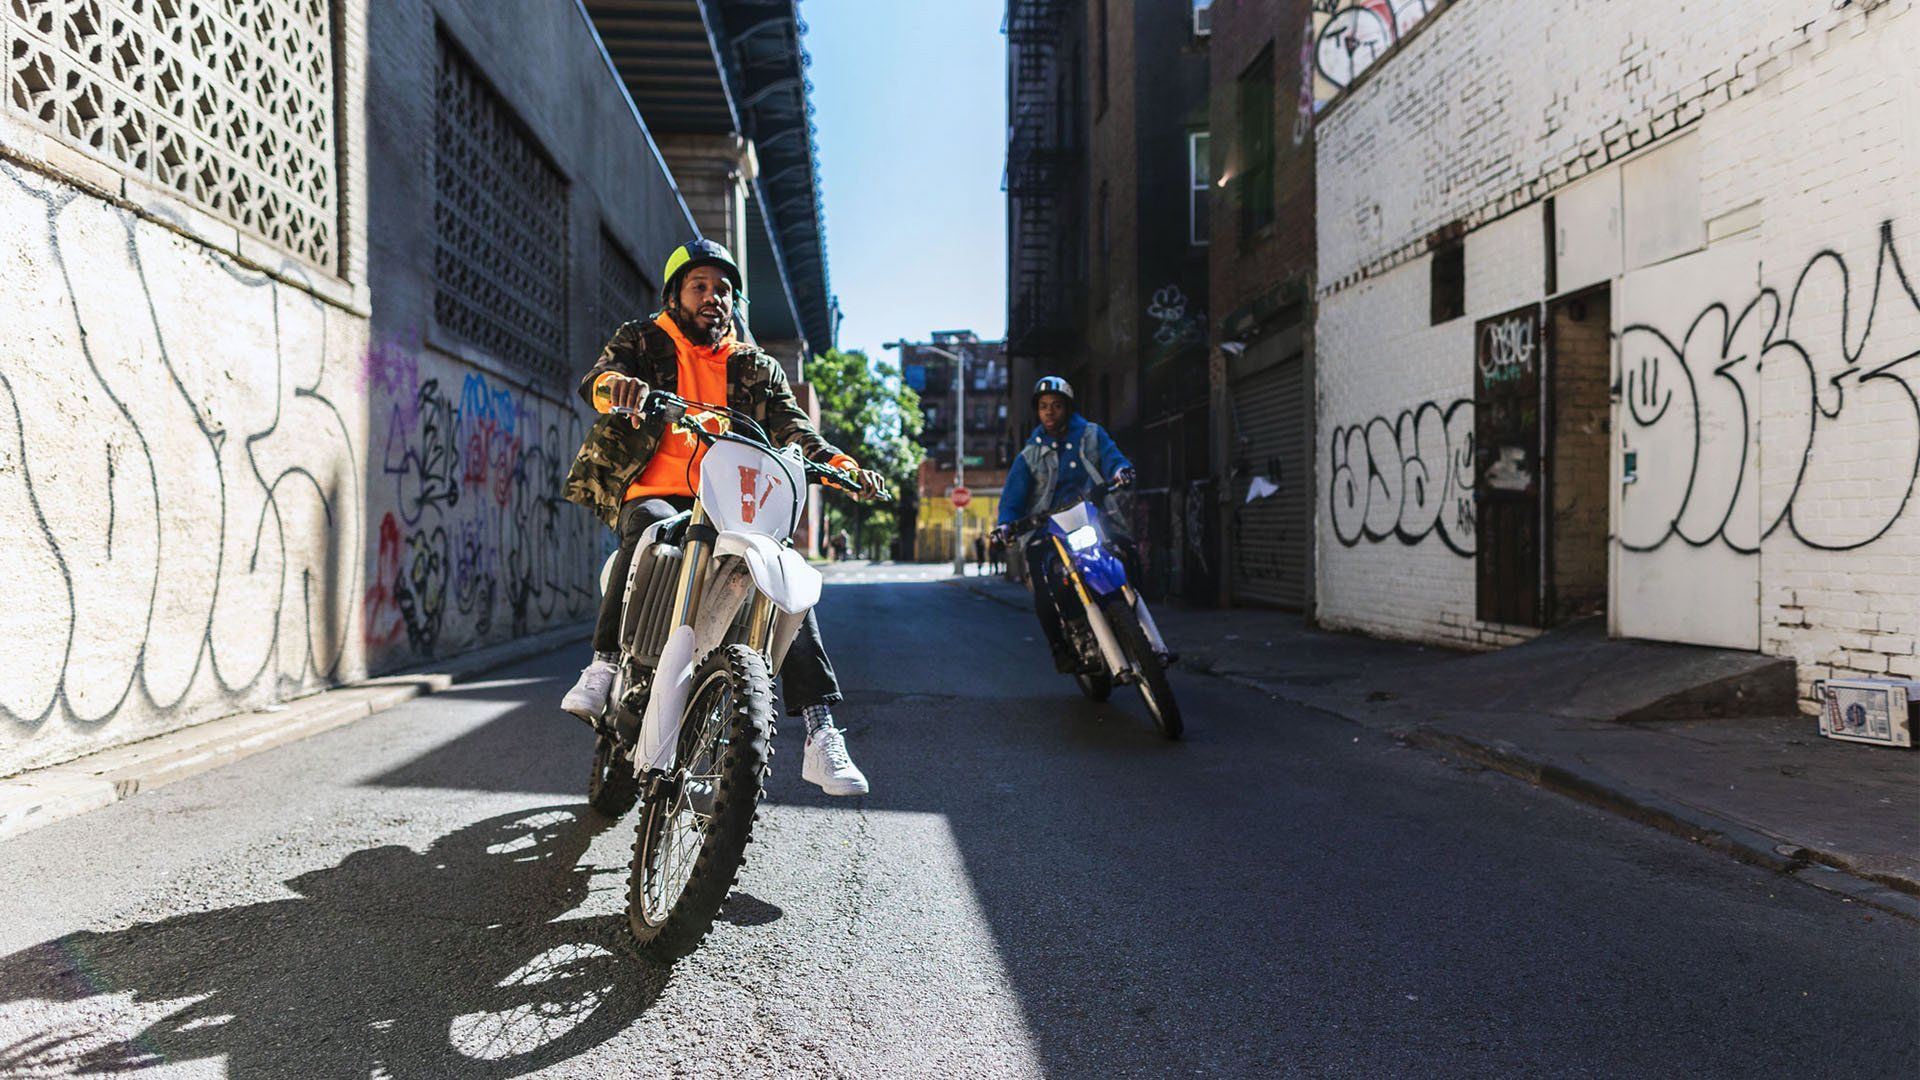 Two men on dirt bikes in city alley